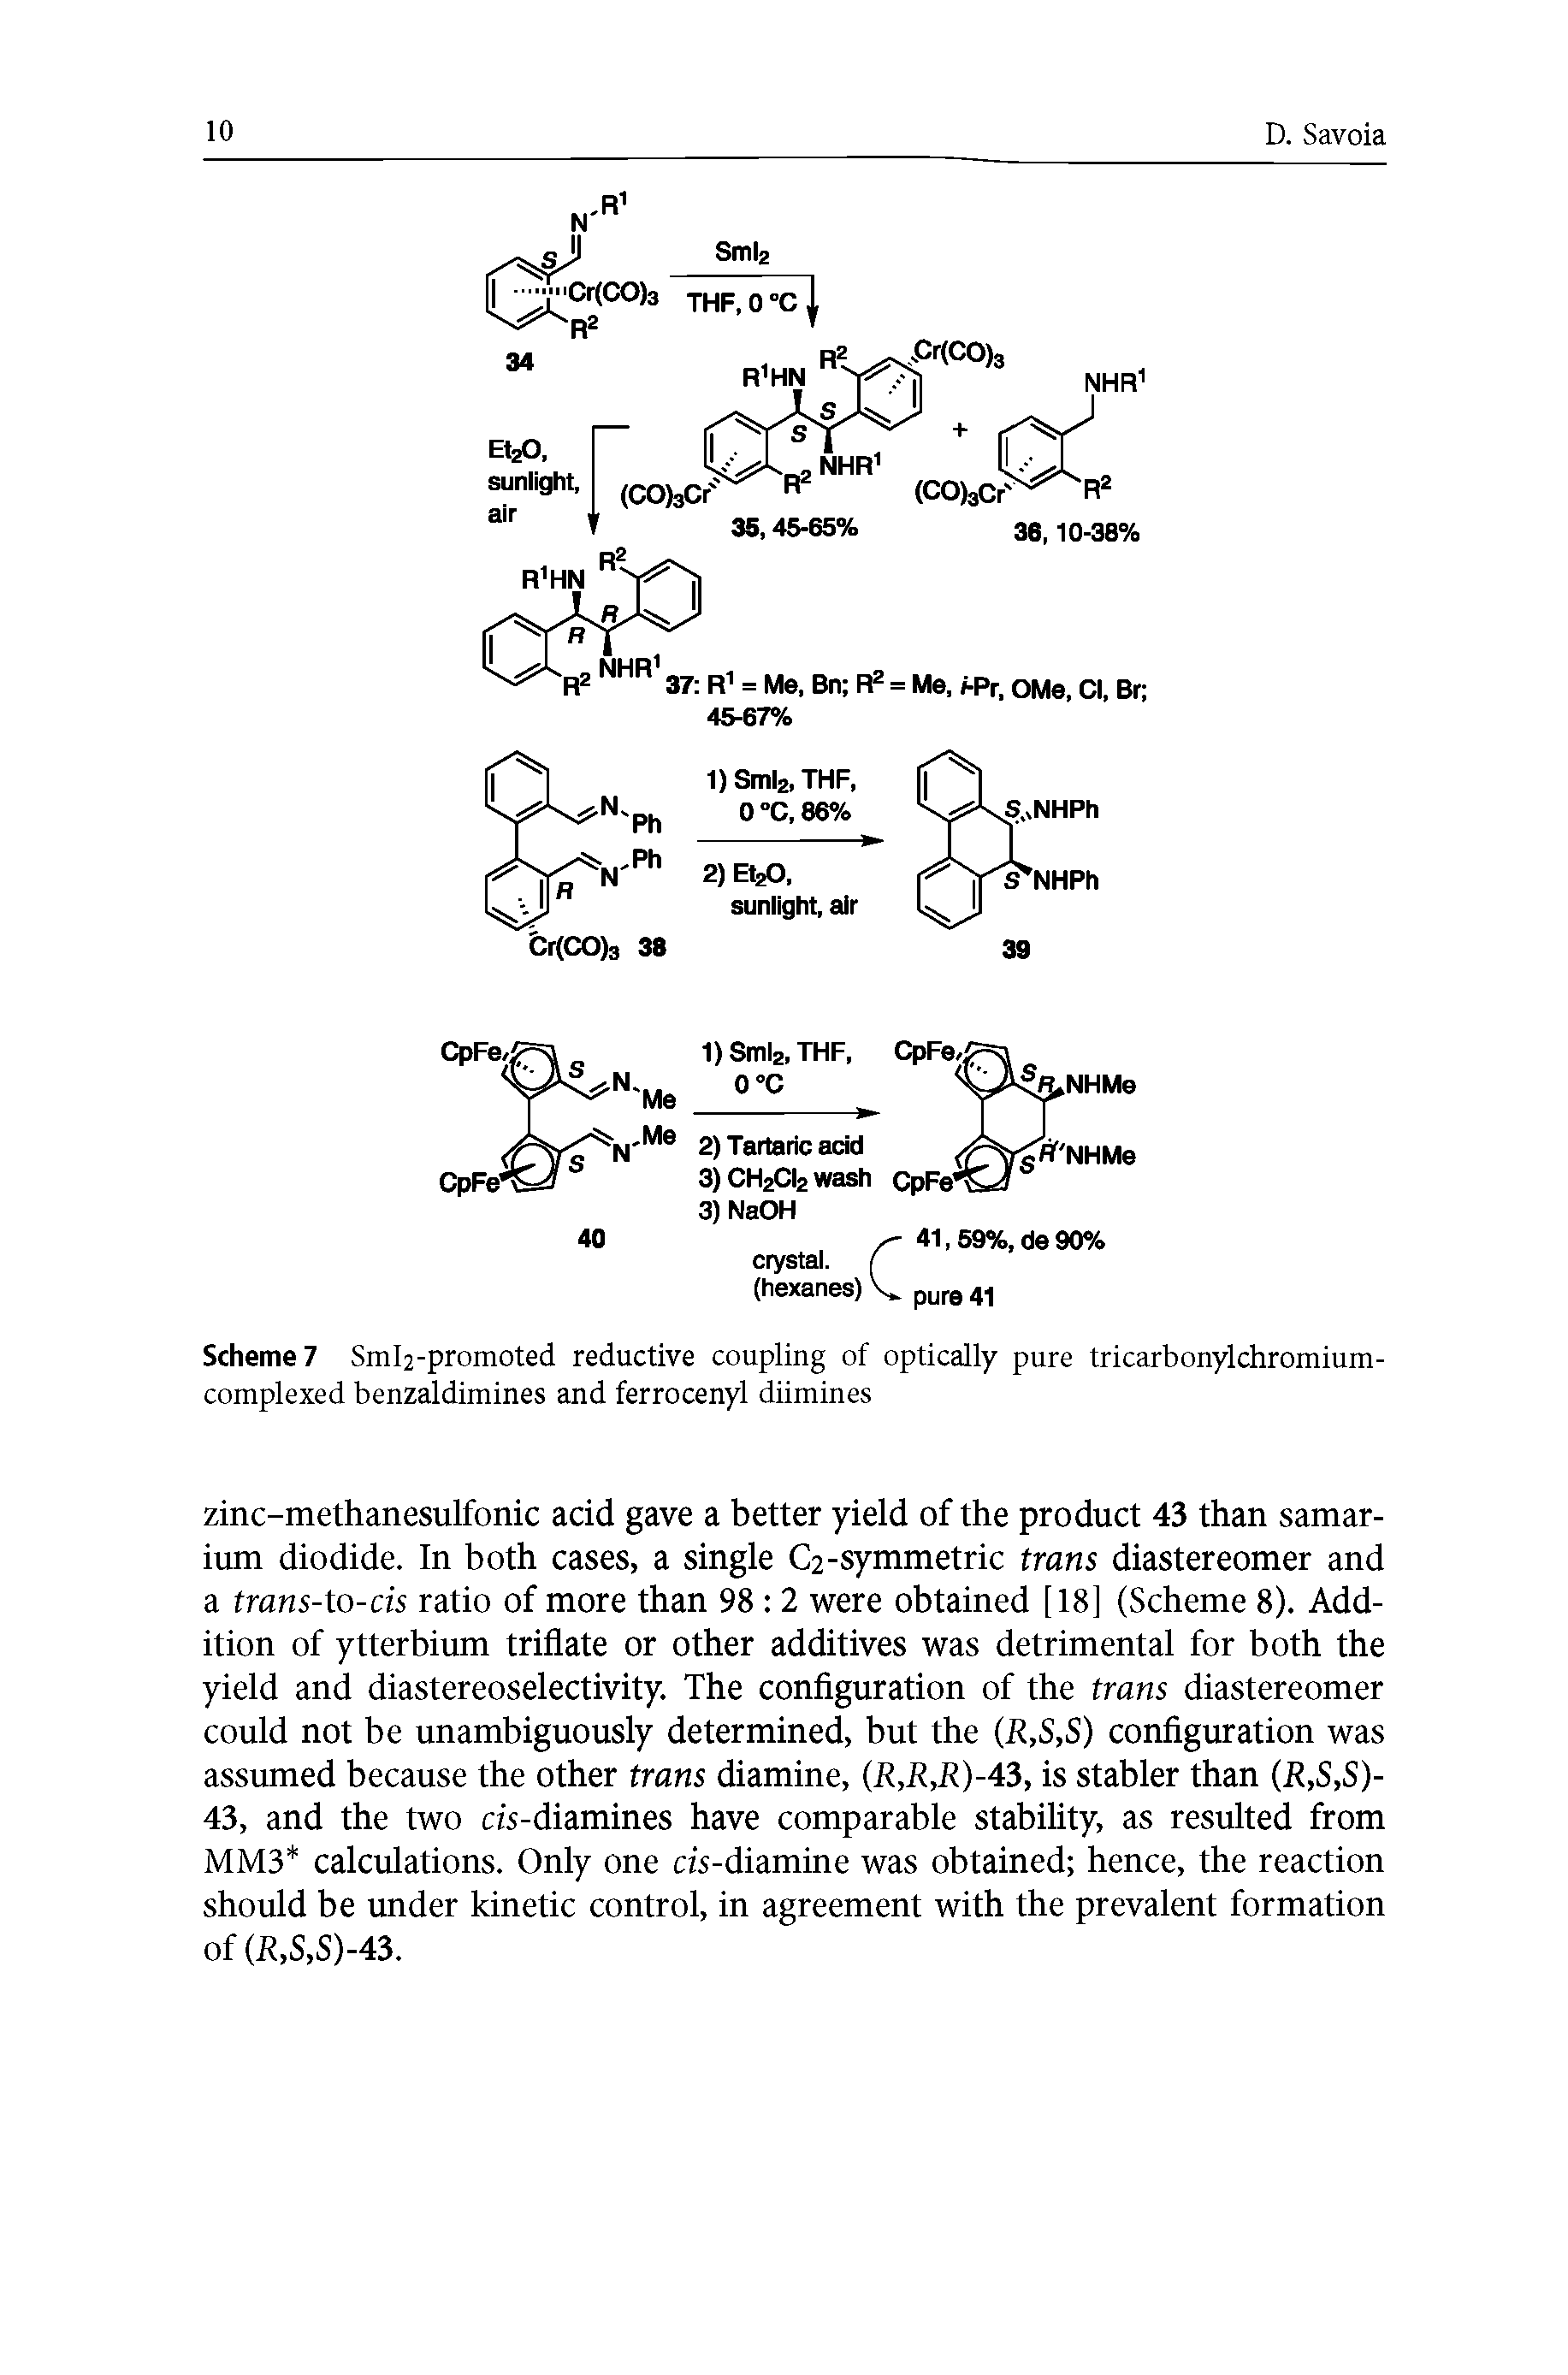 Scheme Sml2-promoted reductive coupling of optically pure tricarbonylchromium-complexed benzaldimines and ferrocenyl diimines...